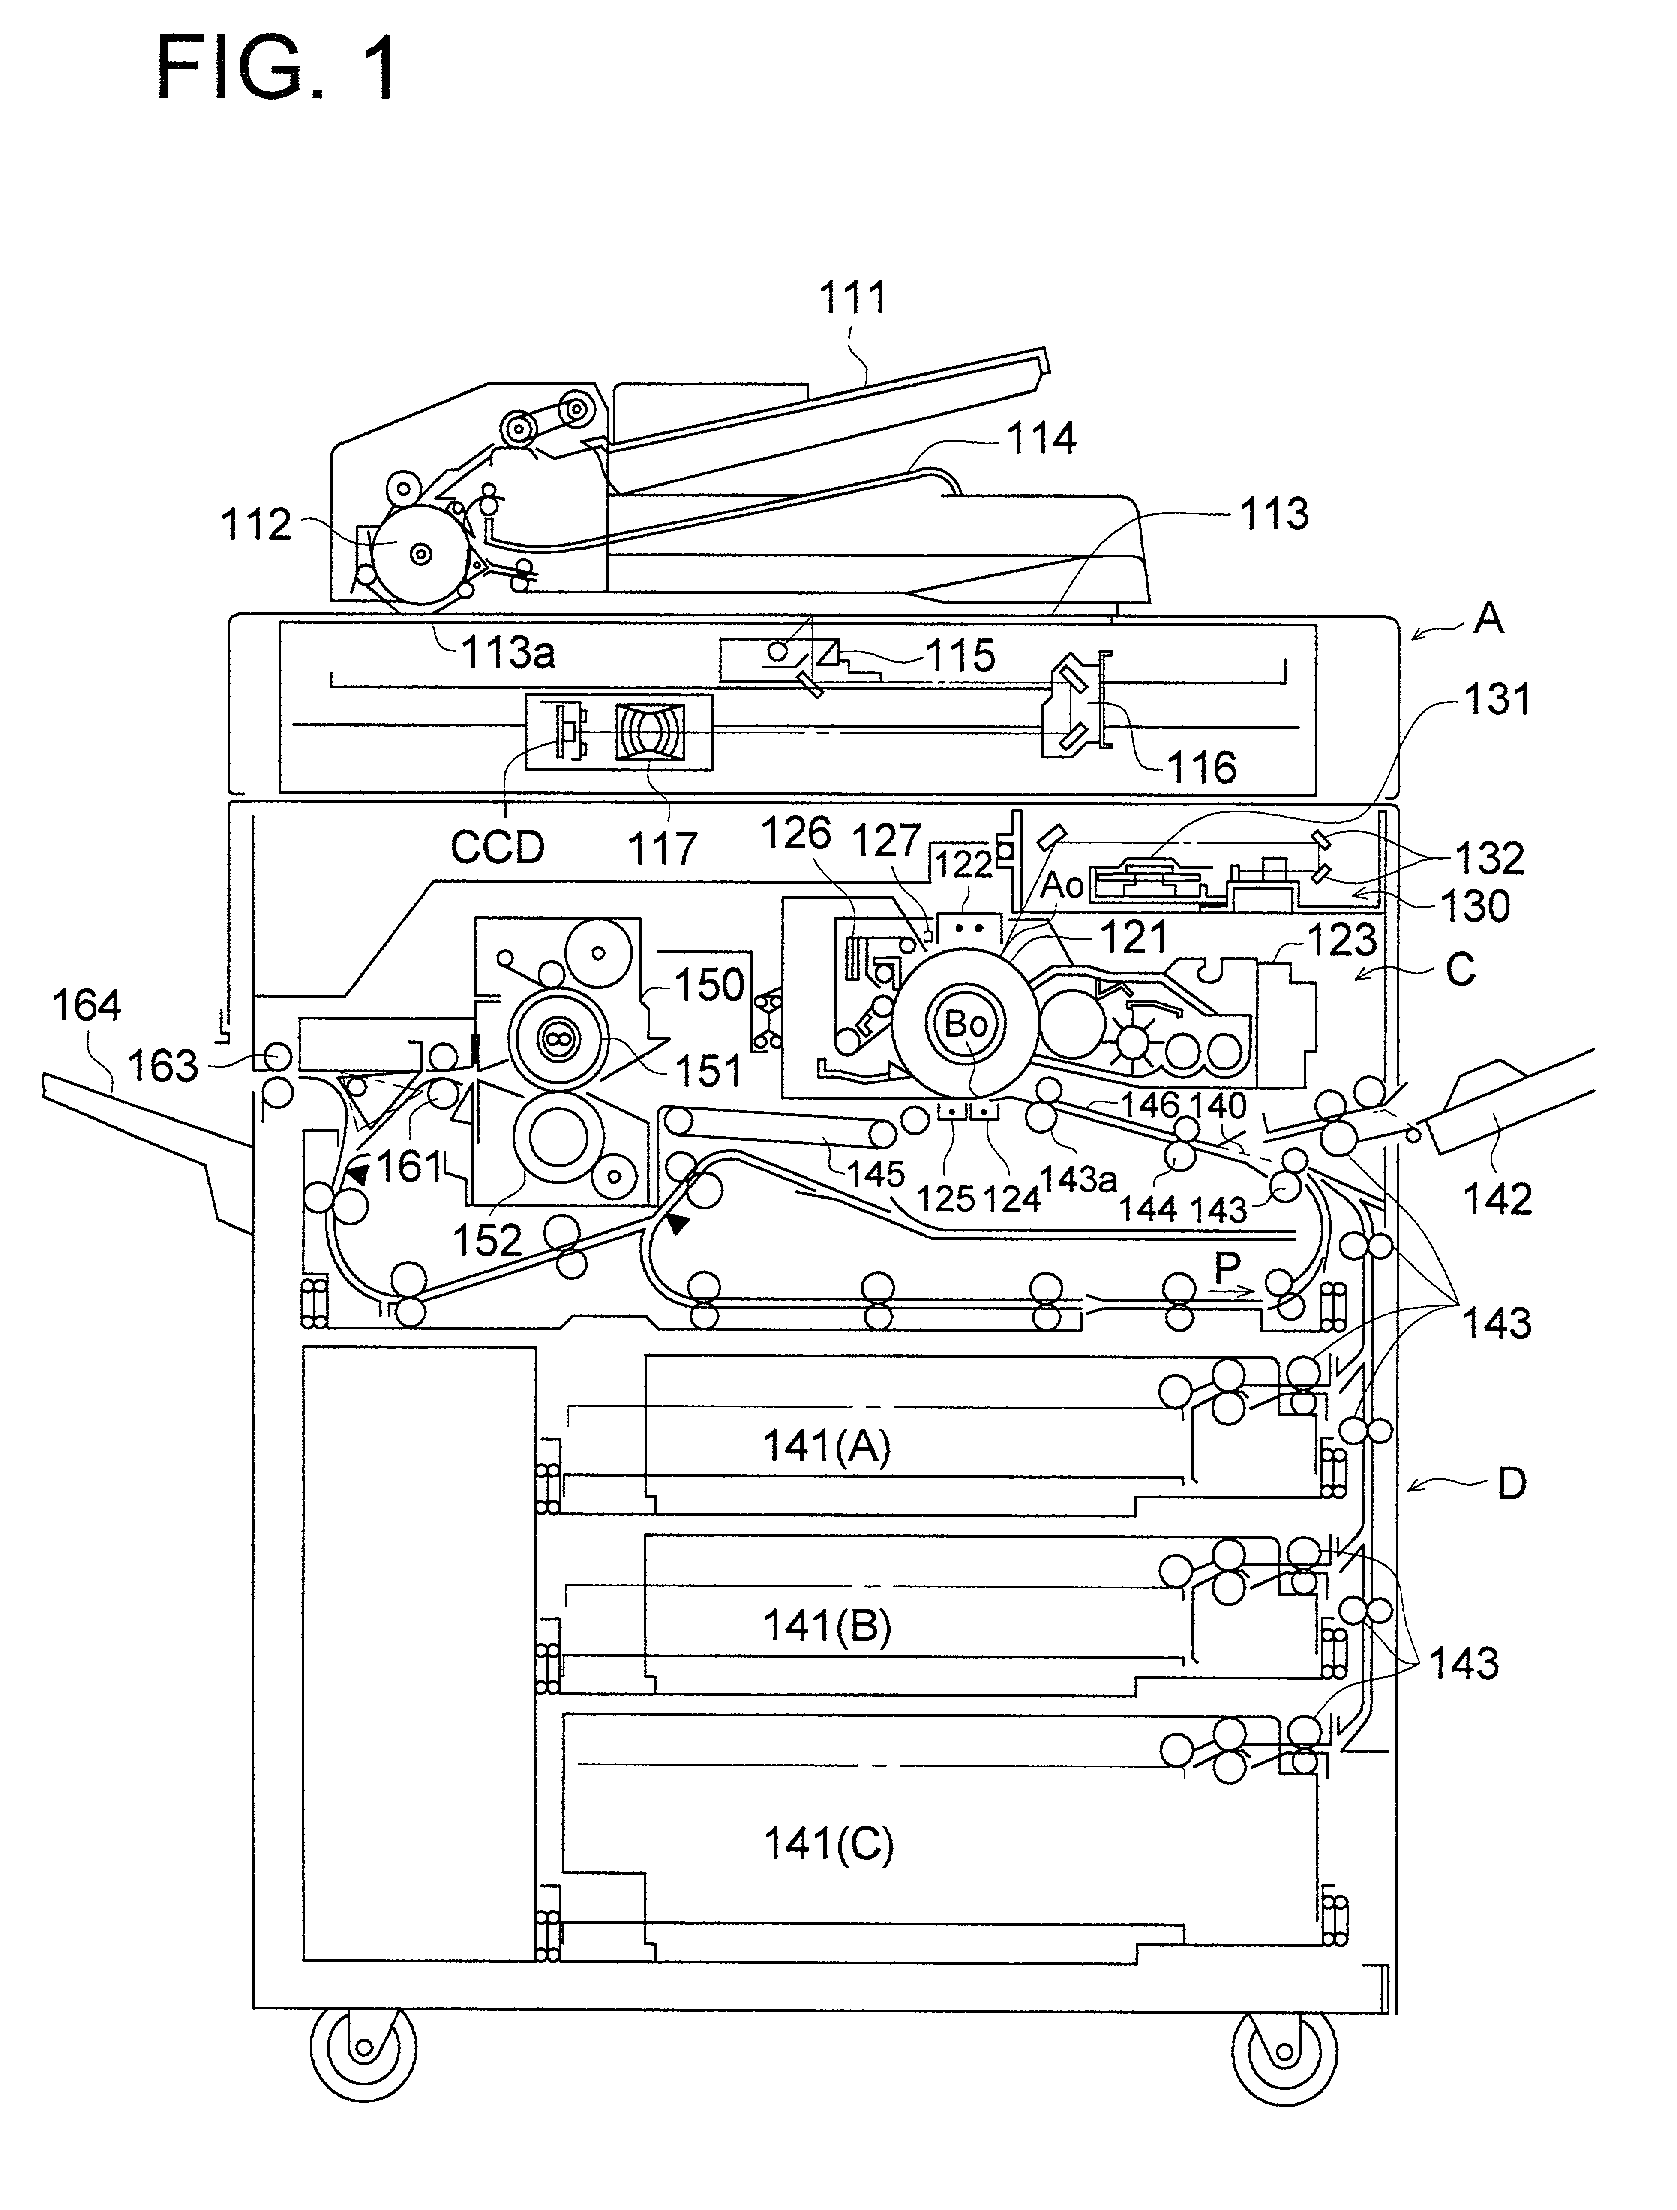 Toner cleaning device, image forming method using the device, and image forming apparatus using the device